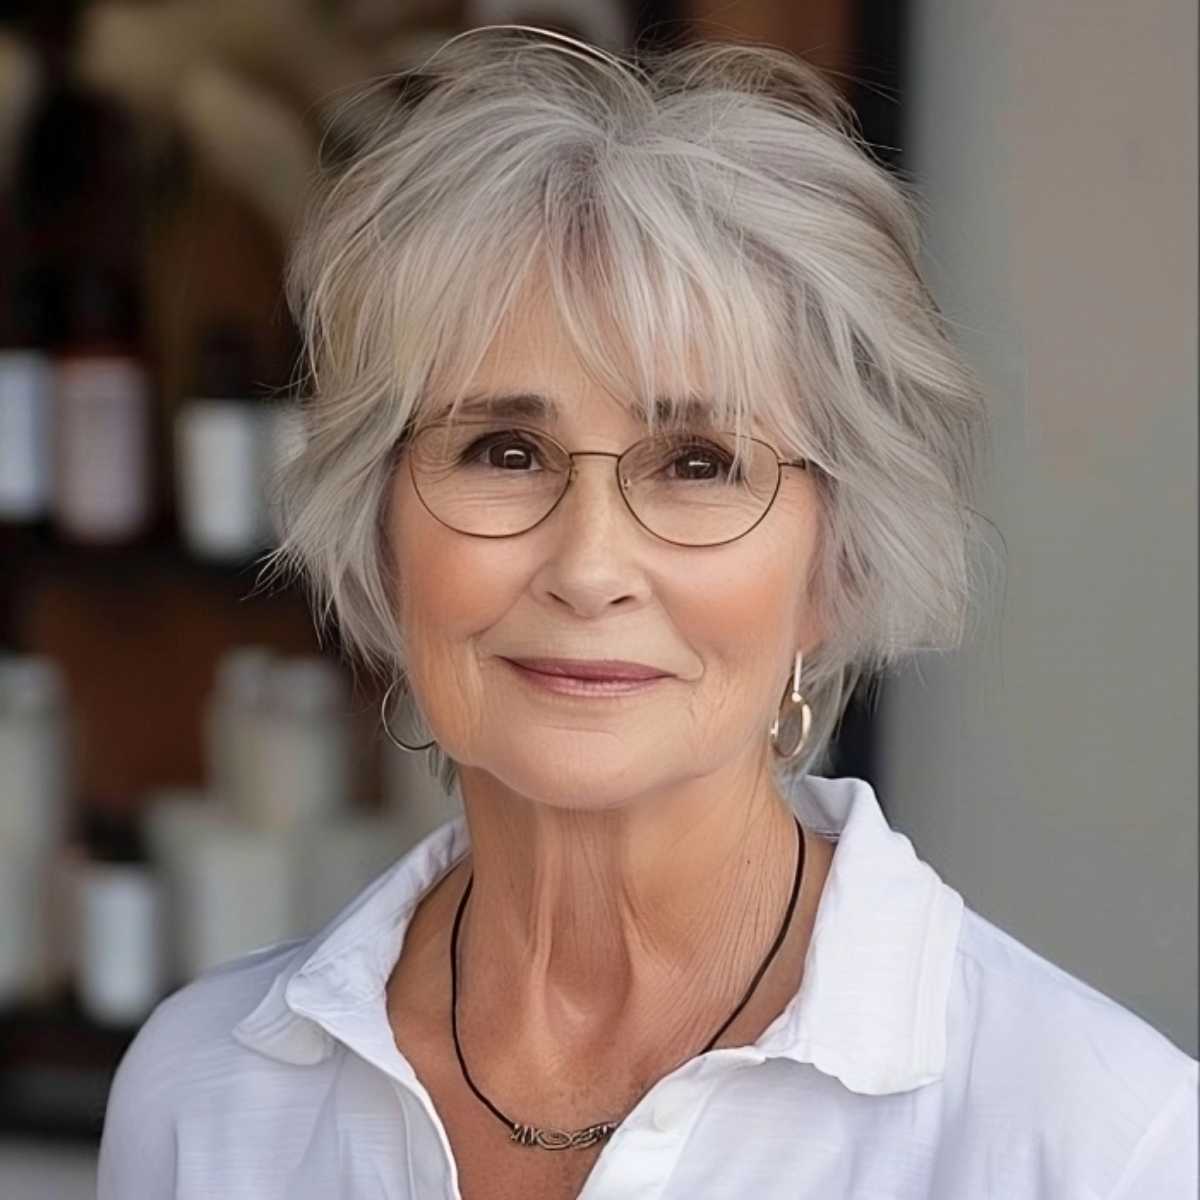 Salt-and-Pepper Short Shag with Bangs for 70-Year-Olds with Glasses